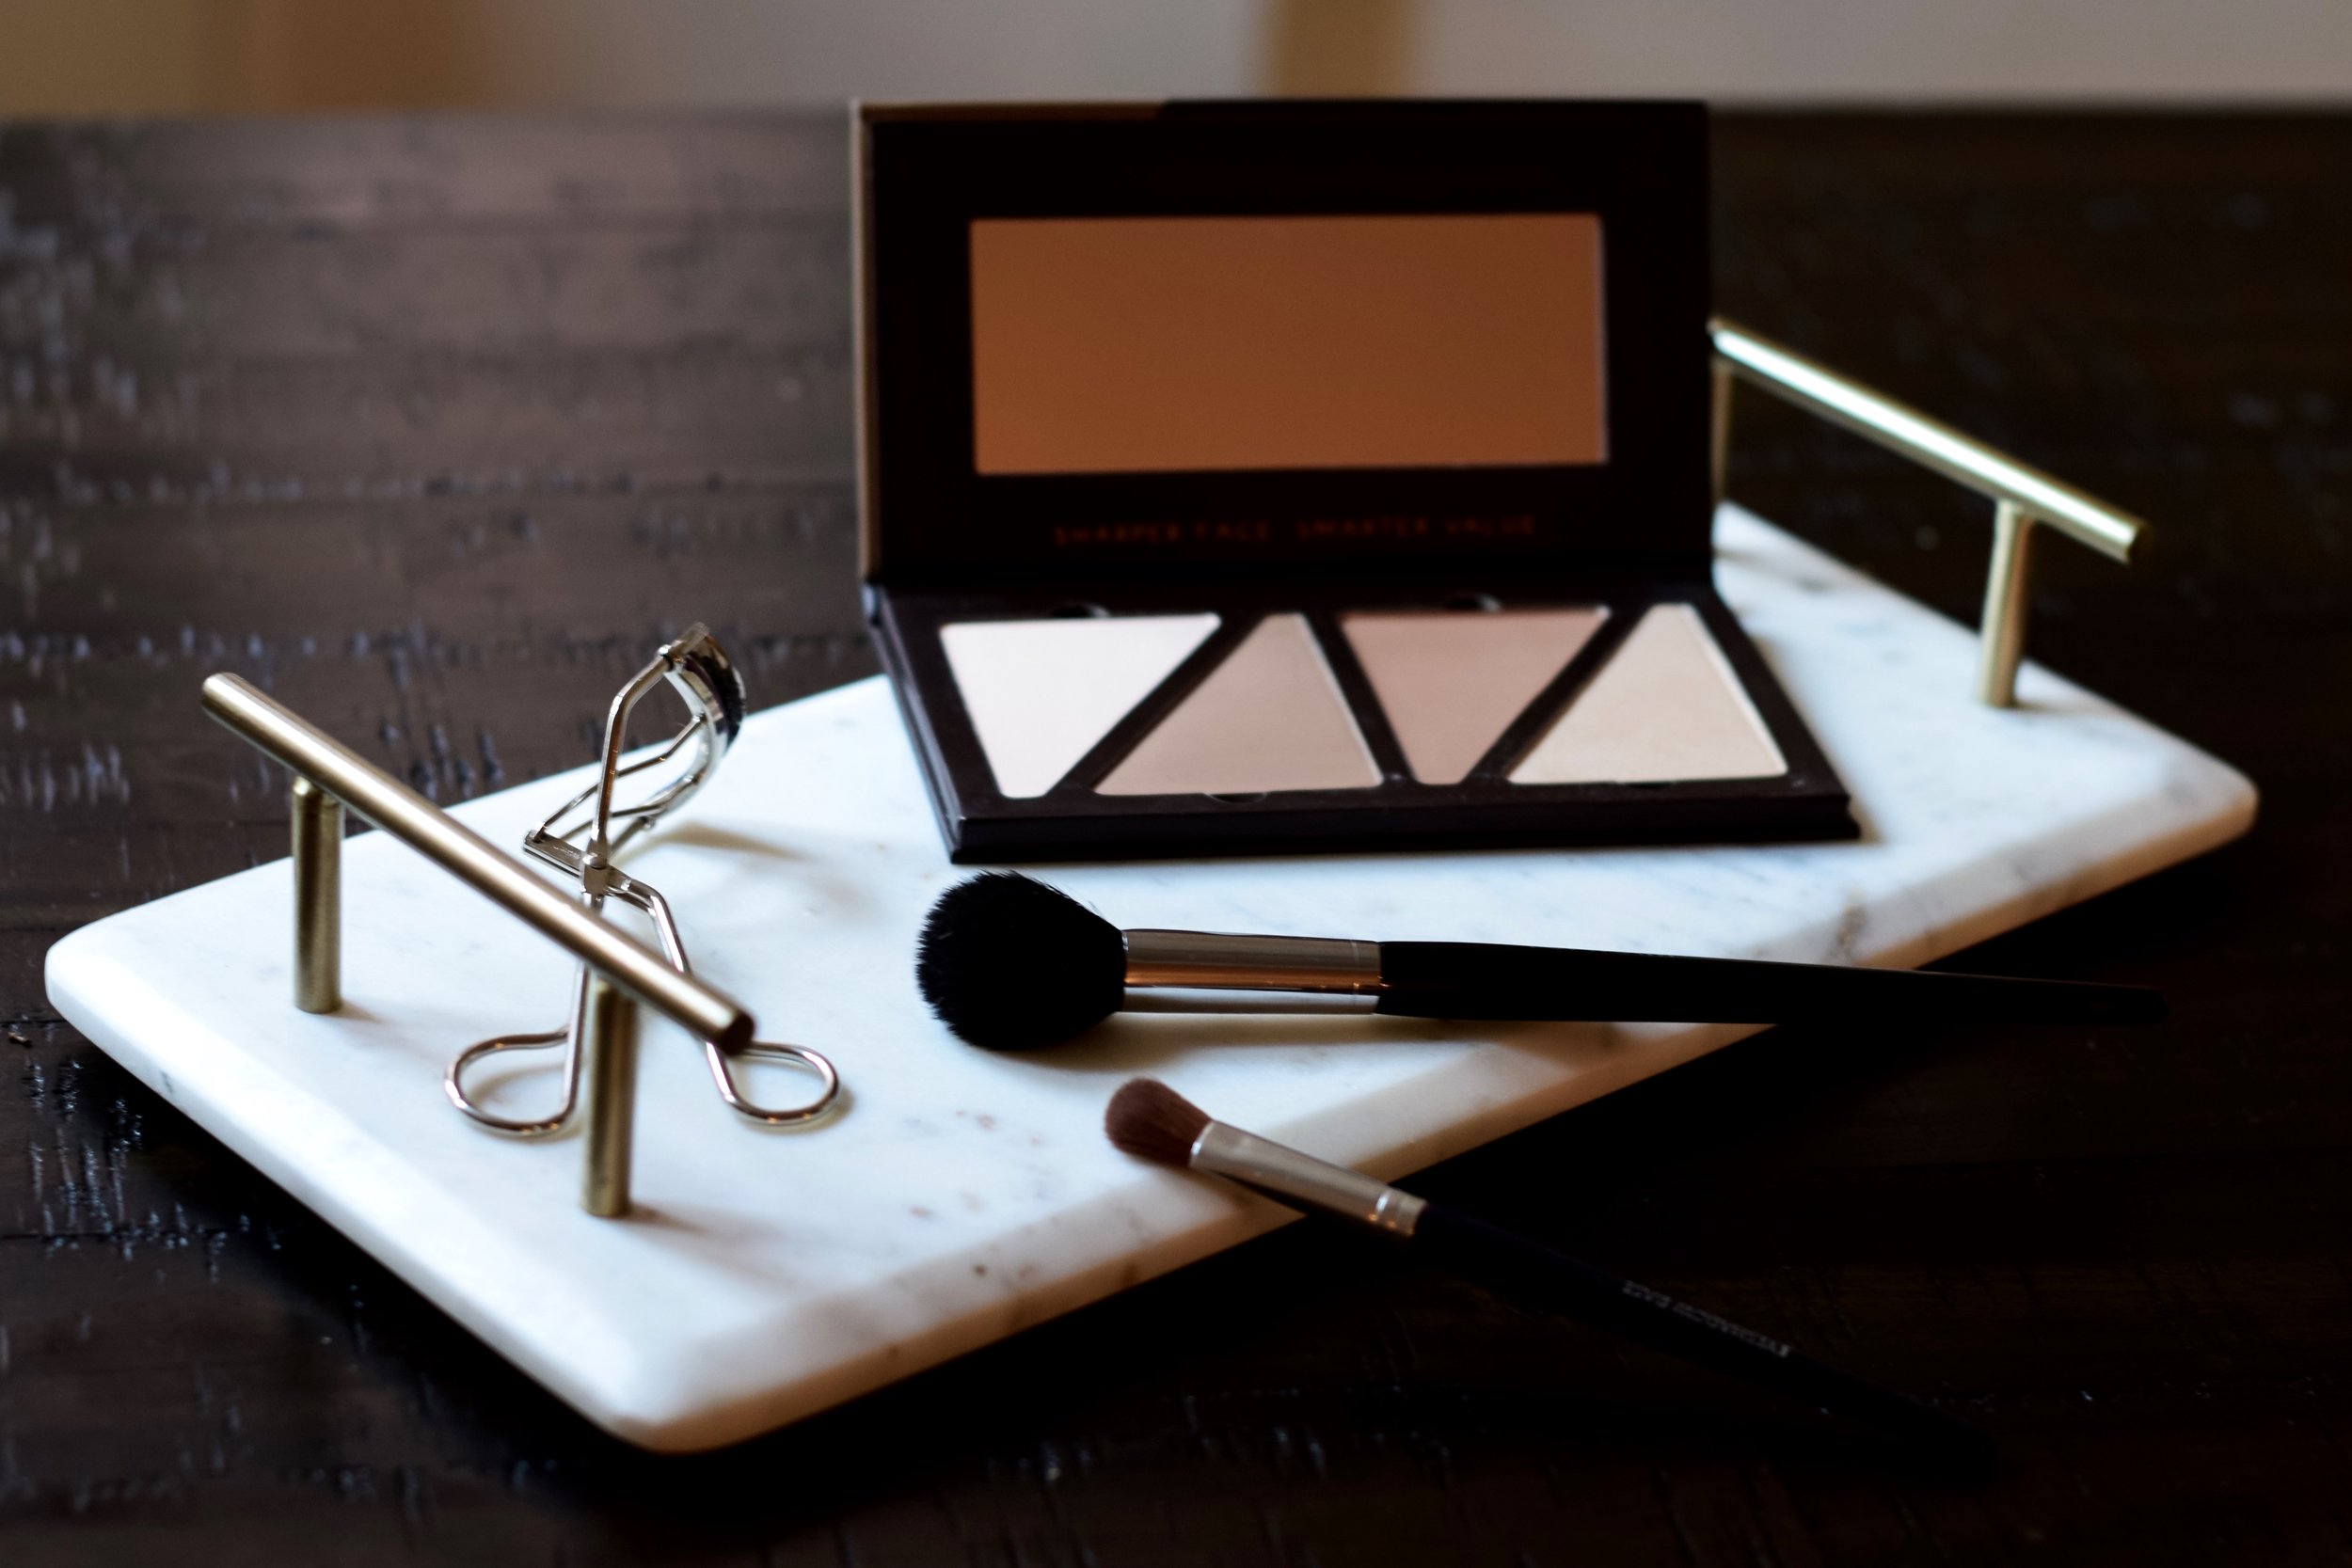 Guize Face FX Contour Palette Review Esther Santer Fashion Blog NYC Street Style Blogger Outfit OOTD Trendy Makeup Beauty Product Bronzer Highlighter Powder Brush Shopping Value $40 Radiant Glow Skin Beautiful Shades Eye Shadow Brand Company Collab.jpg